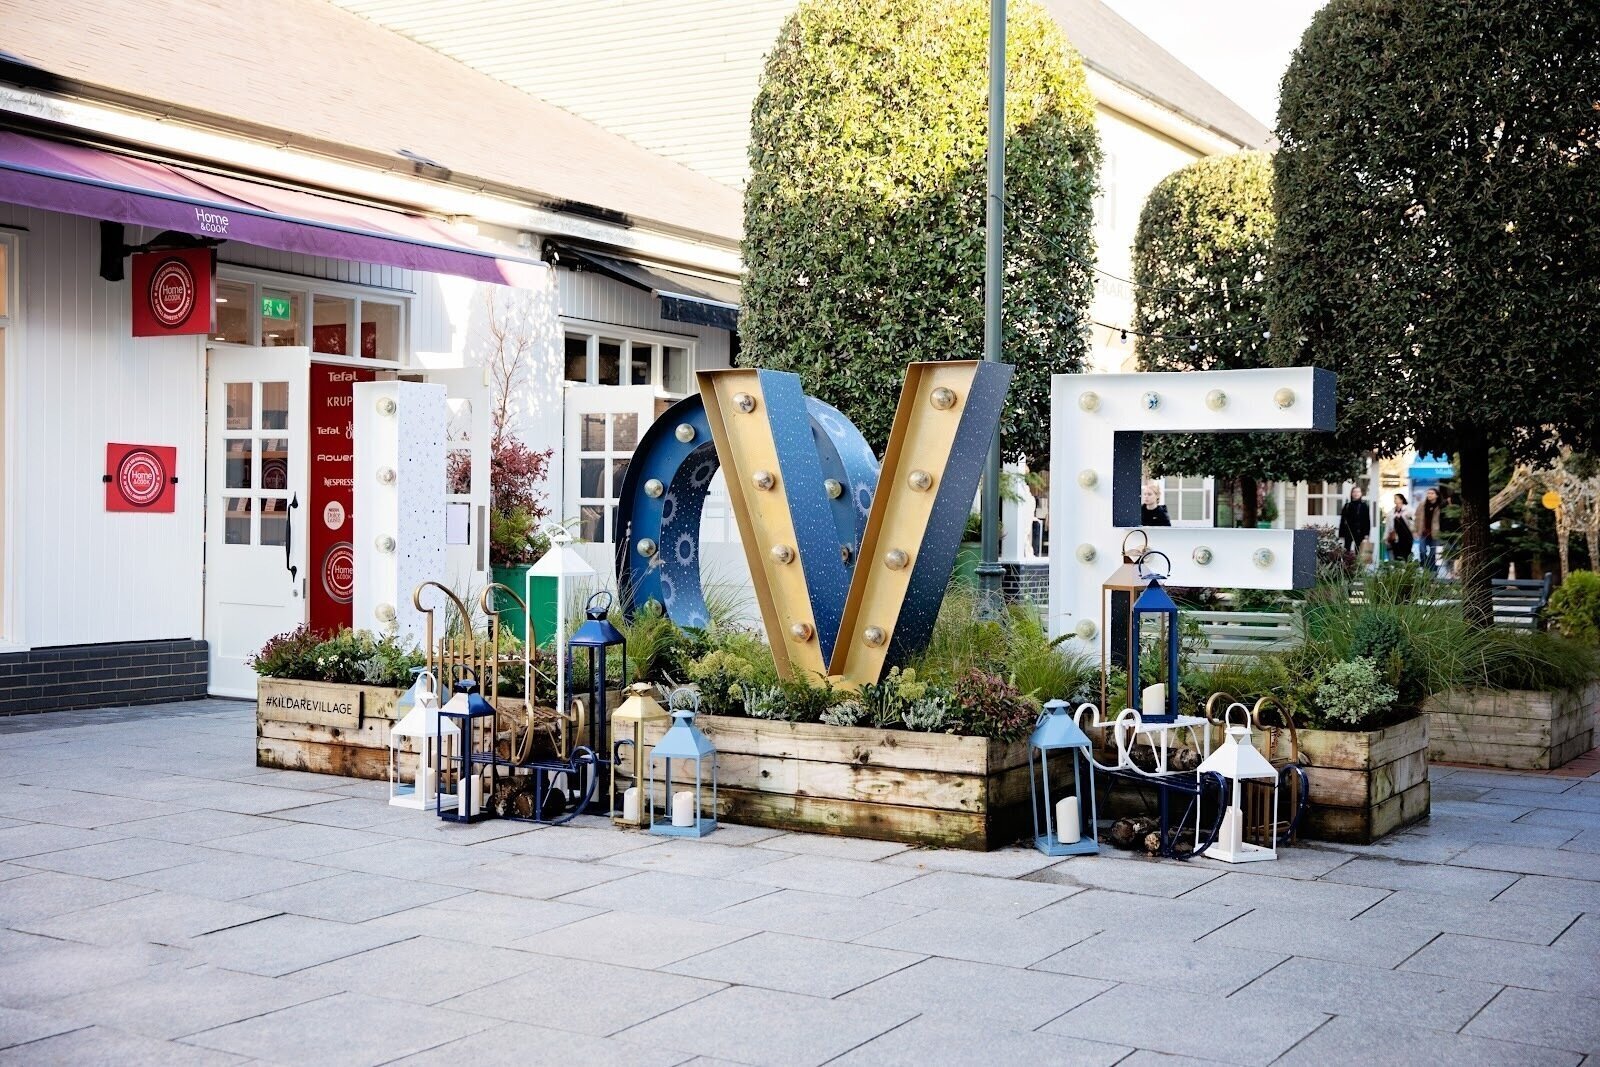 <span class="translation_missing" title="translation missing: en.meta.location_title, location_name: Kildare Village, city: Kildare">Location Title</span>